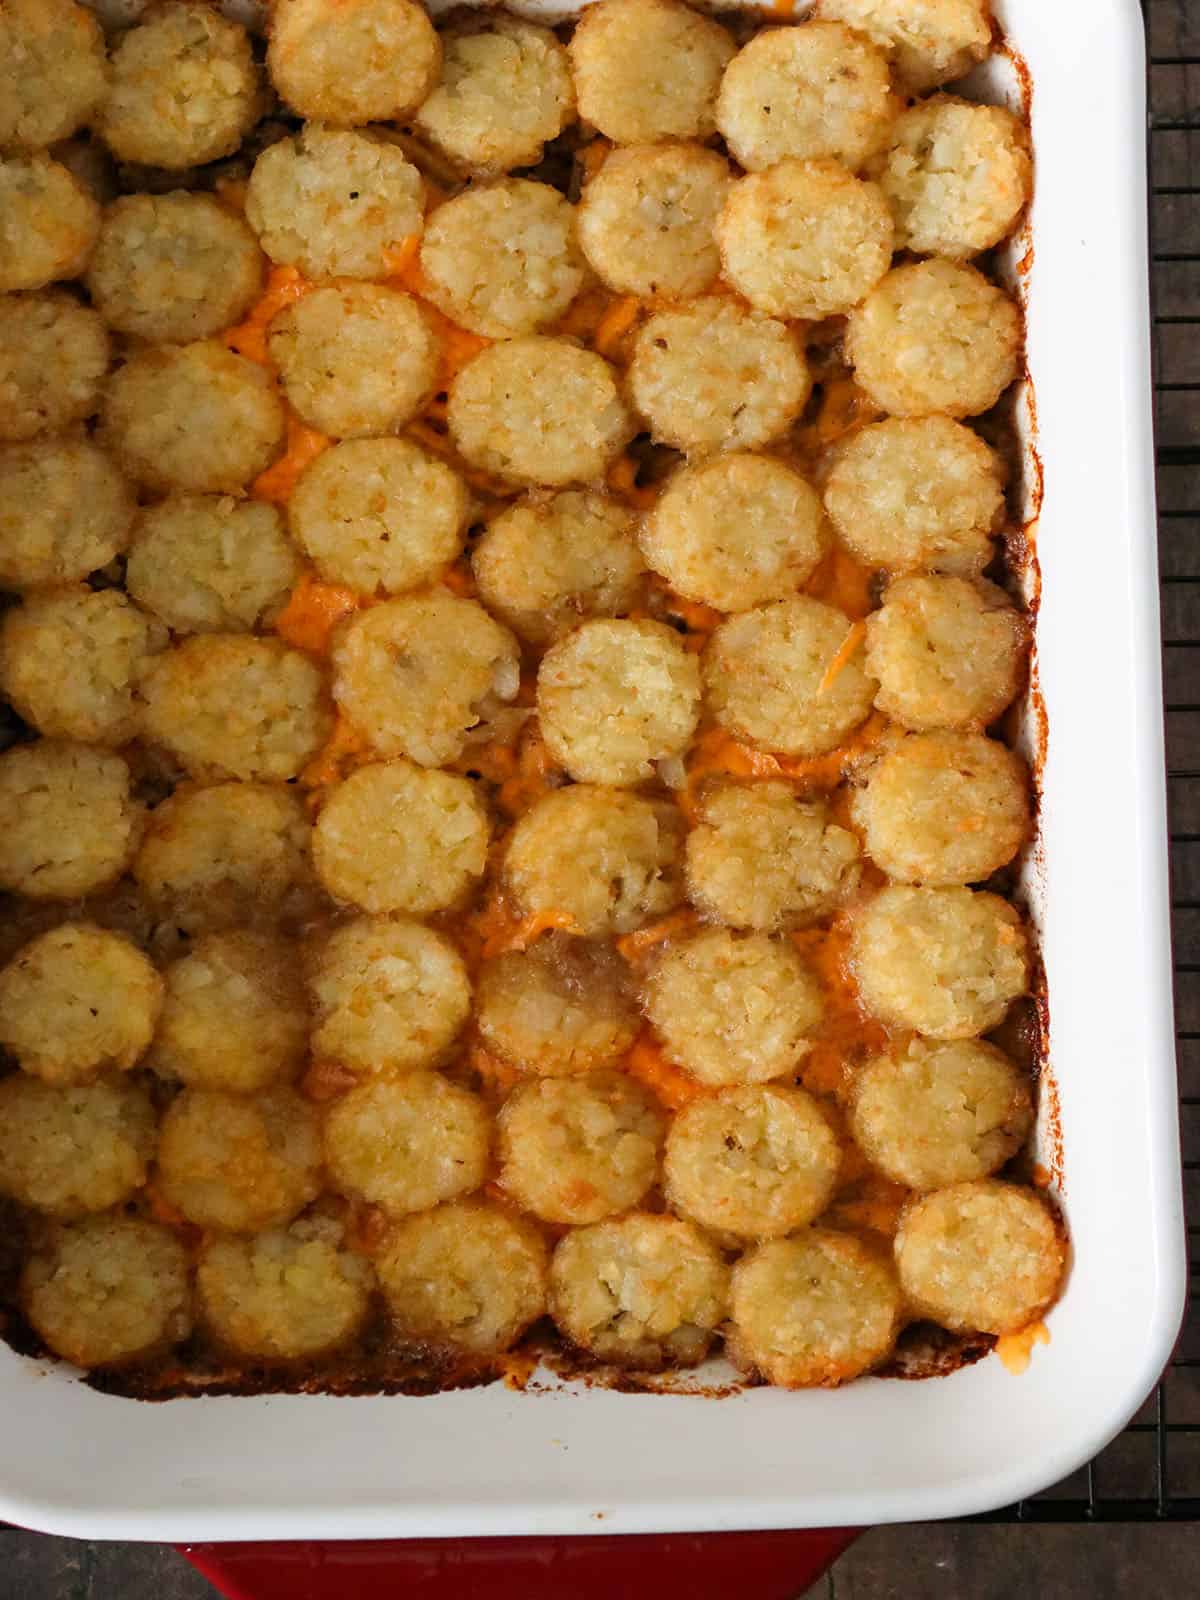 Top shot of tater tots with gravy casserole.